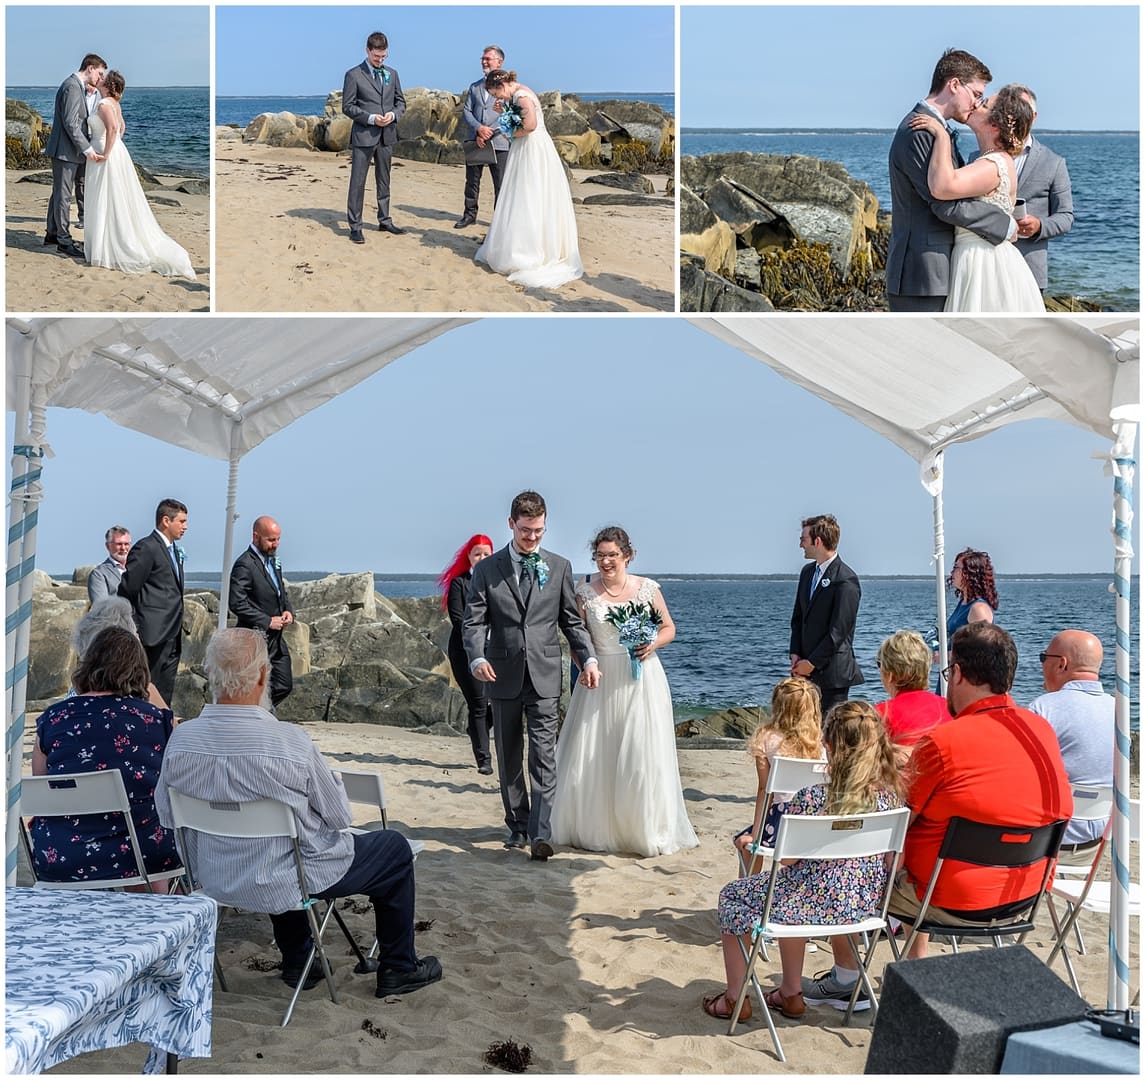 An intimate beach wedding ceremony and the first kiss of the bride and groom in Green Bay, NS.